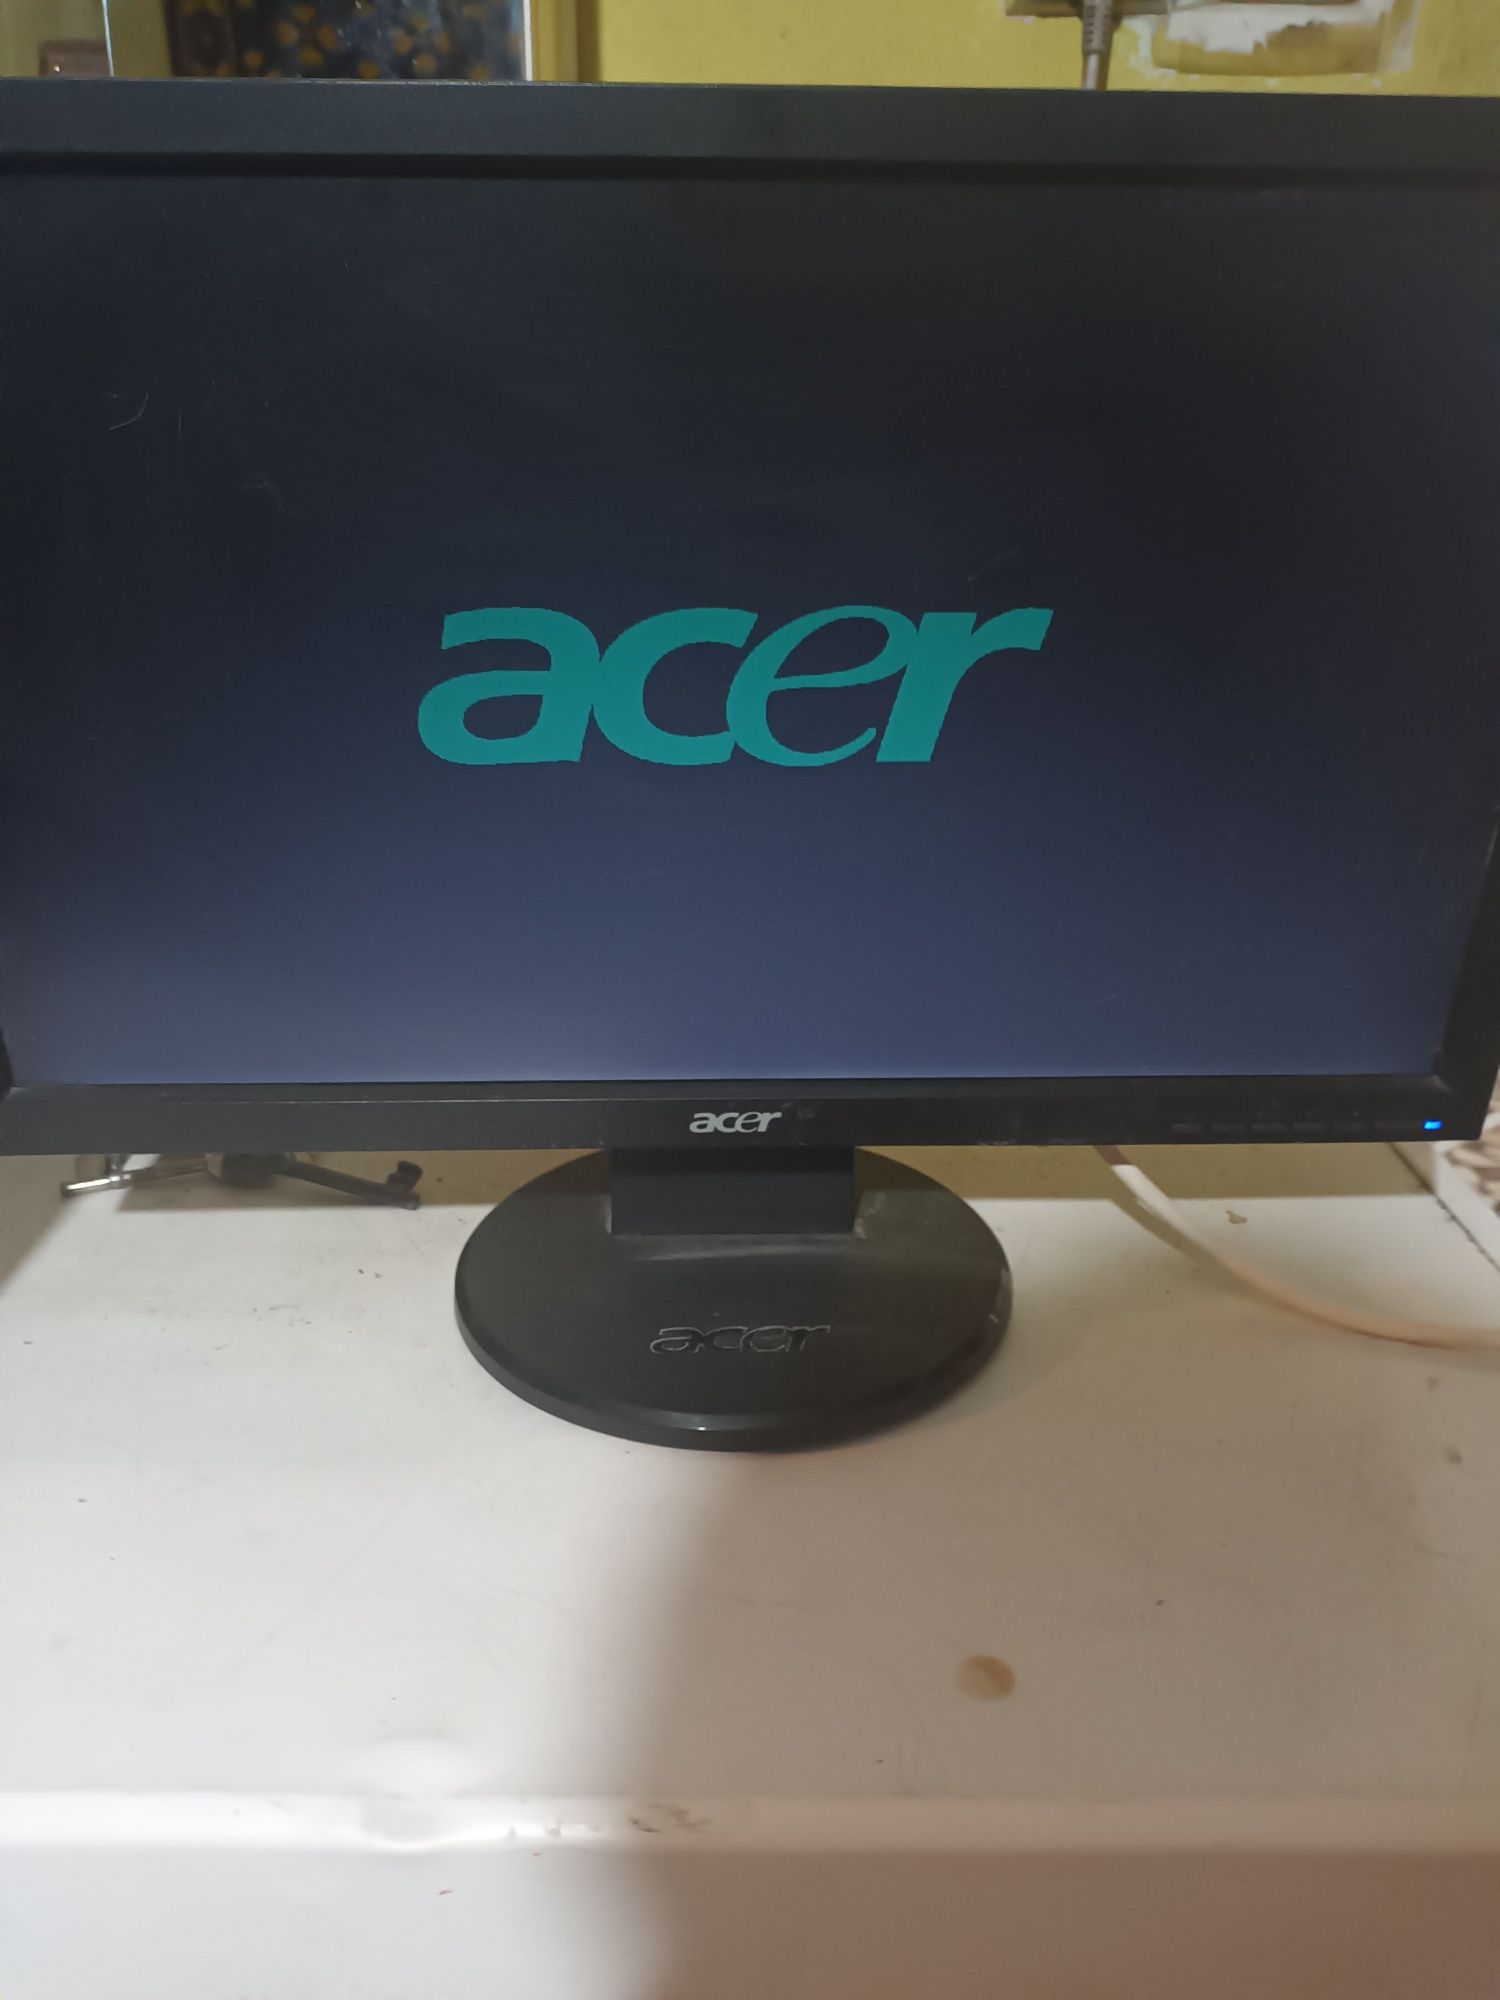 2 monitoare LCD Functionale Philips si Acer 150ron bucata